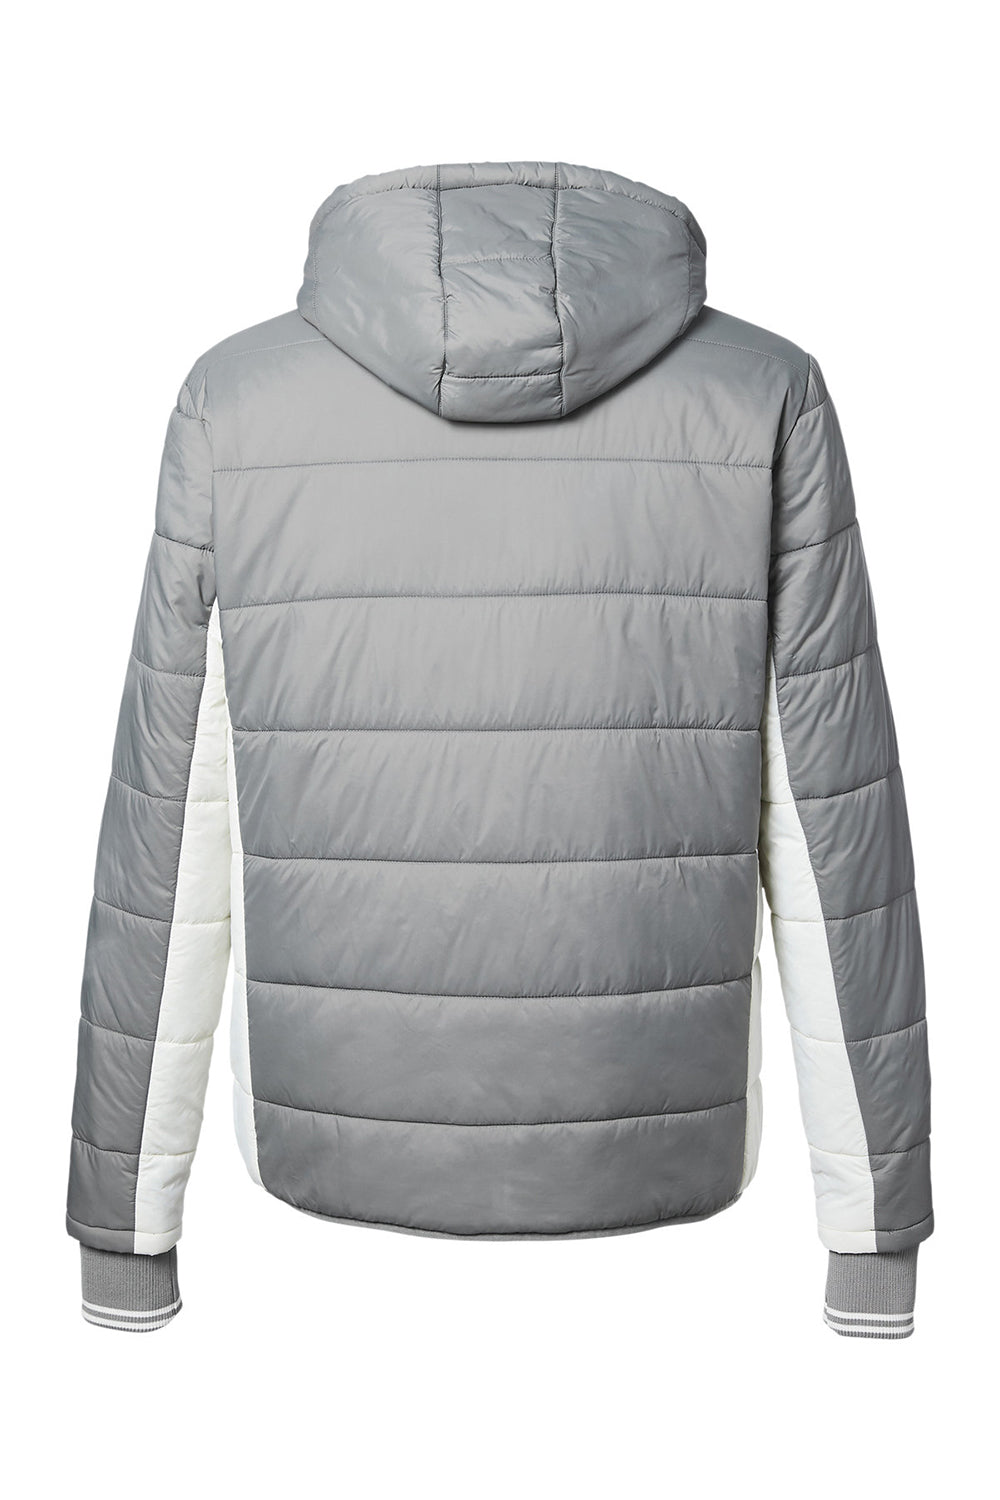 Nautica N17186 Mens Graphite Grey/Antique White Nautical Mile Wind  Resistant Packable Full Zip Hooded Puffer Jacket —